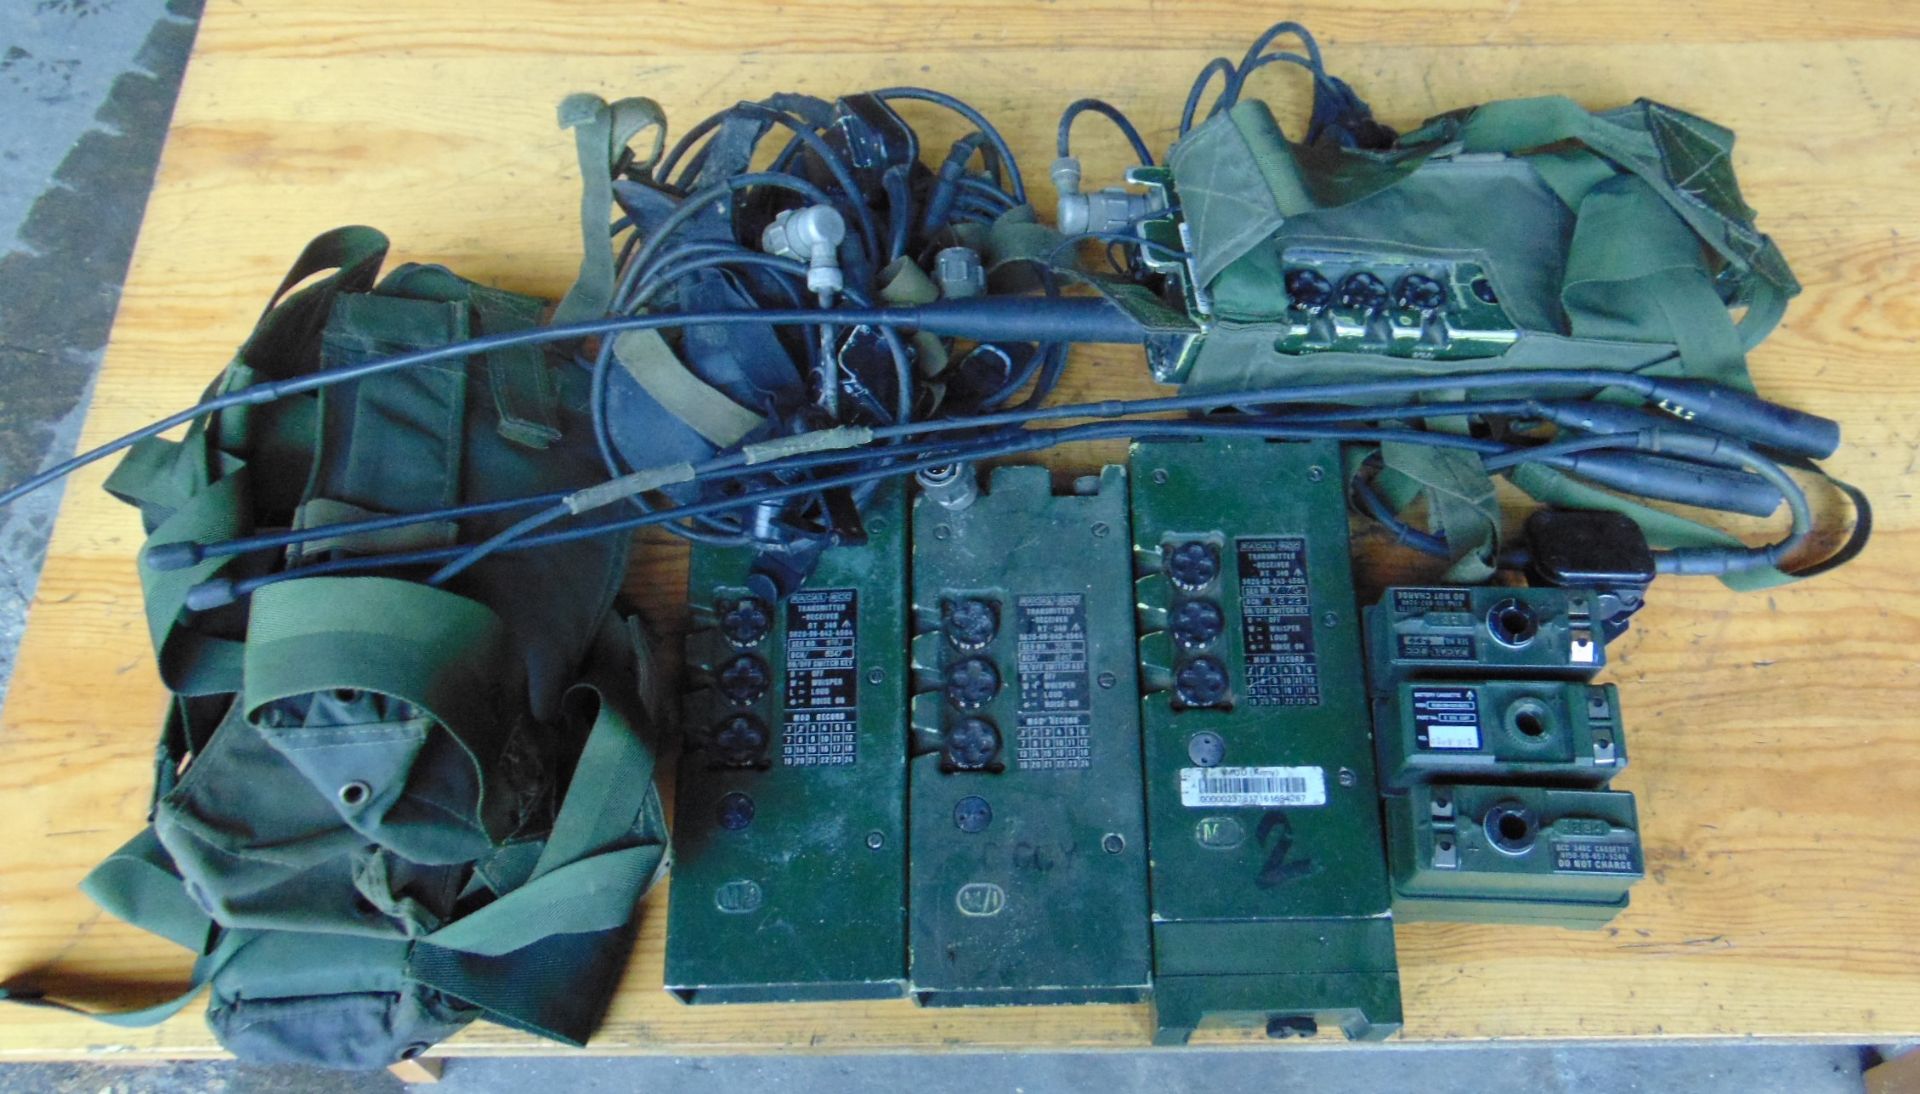 4 x UK / RT 349 Transmitter Receiver Complete as shown. - Image 2 of 6